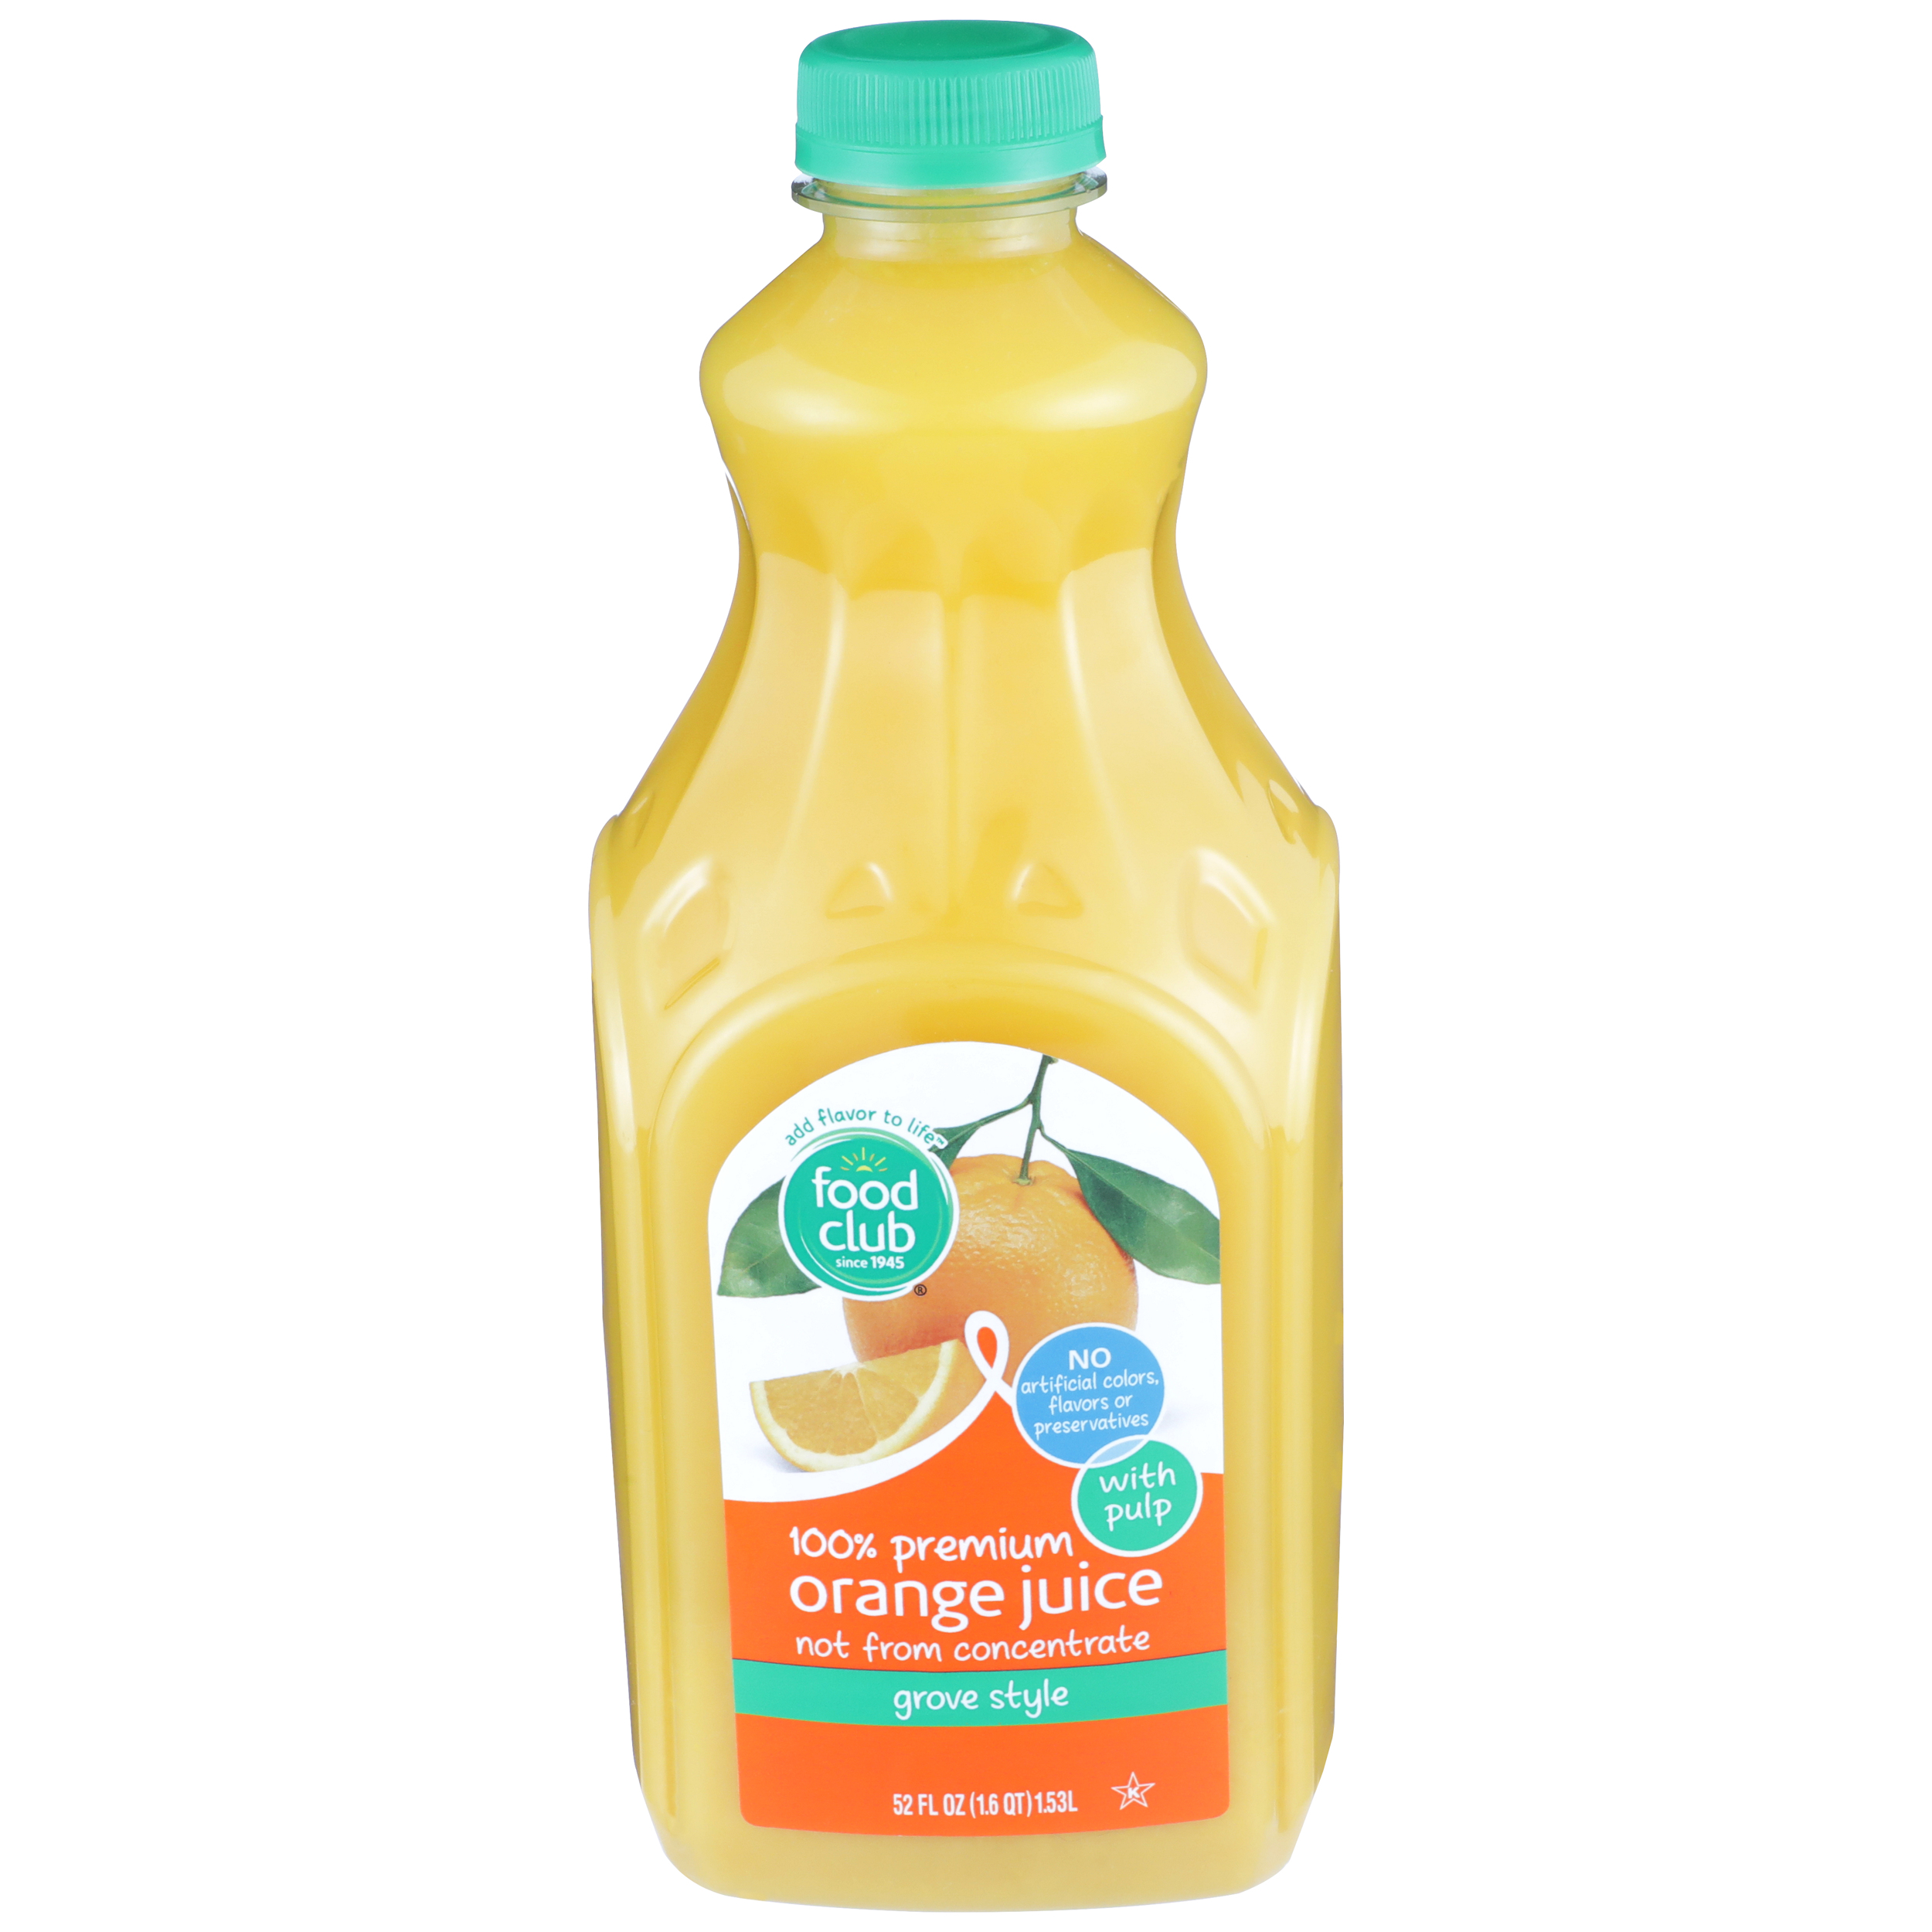 Organic Coconut Aminos Ginger-turmeric Sauce, 9 oz at Whole Foods Market